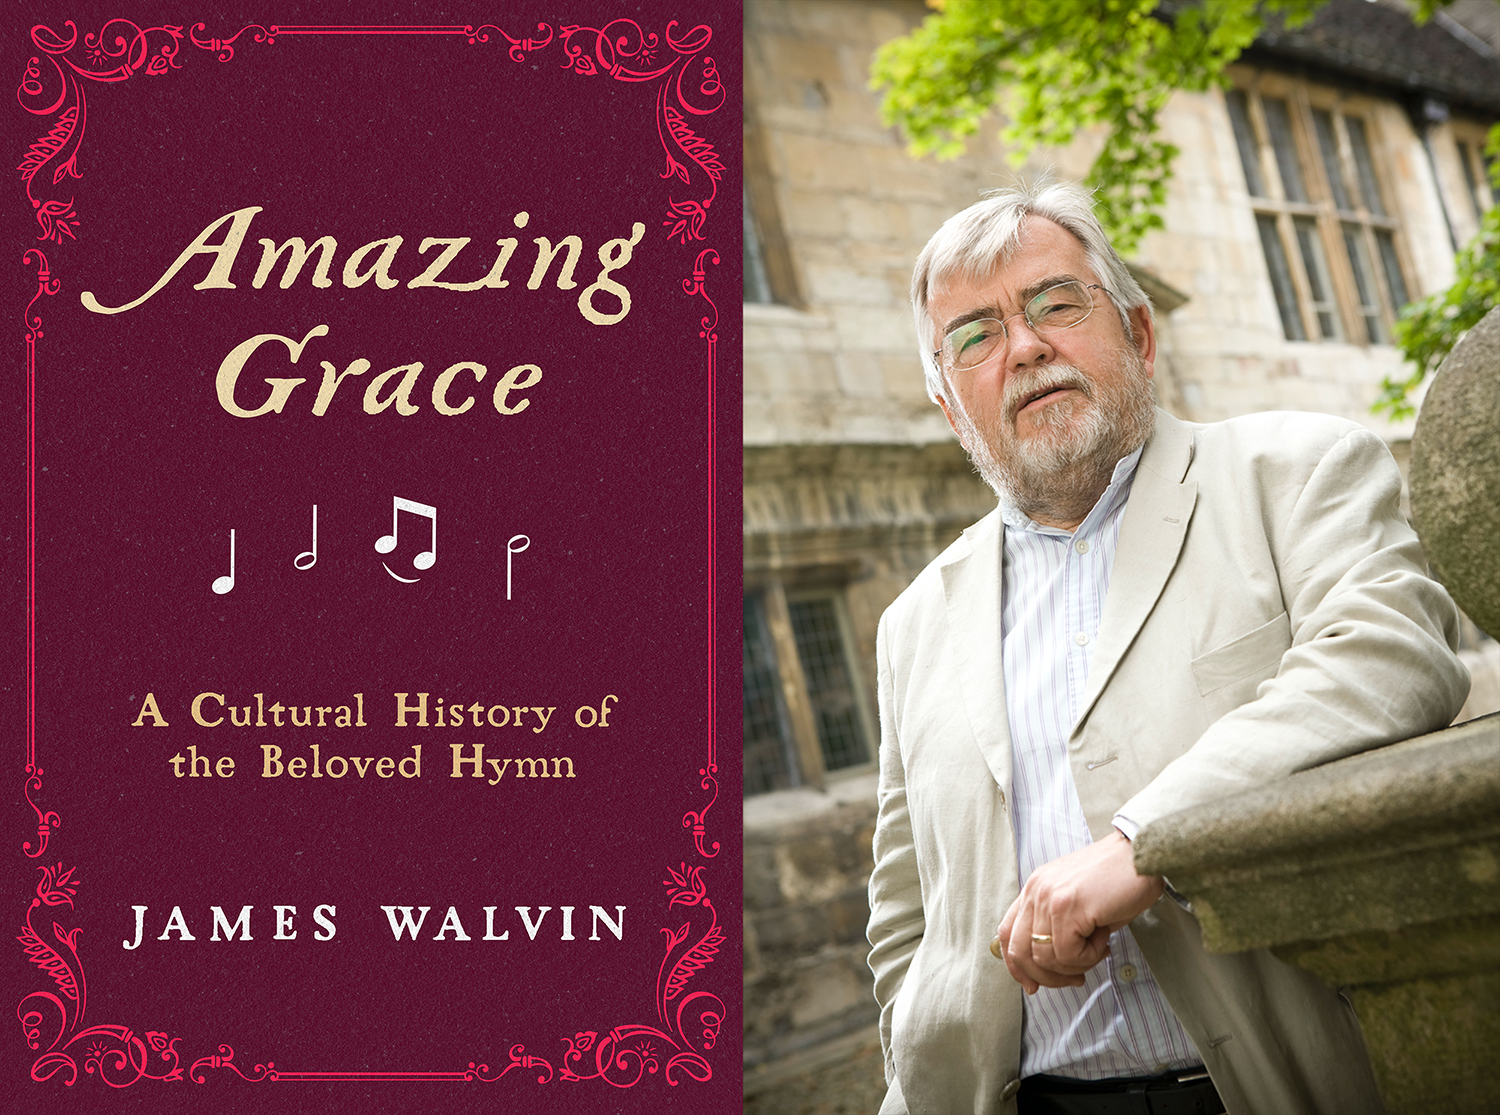 Author James Walvin and his new book "Amazing Grace: A Cultural History of the Beloved Hymn." (Images courtesy Walvin)